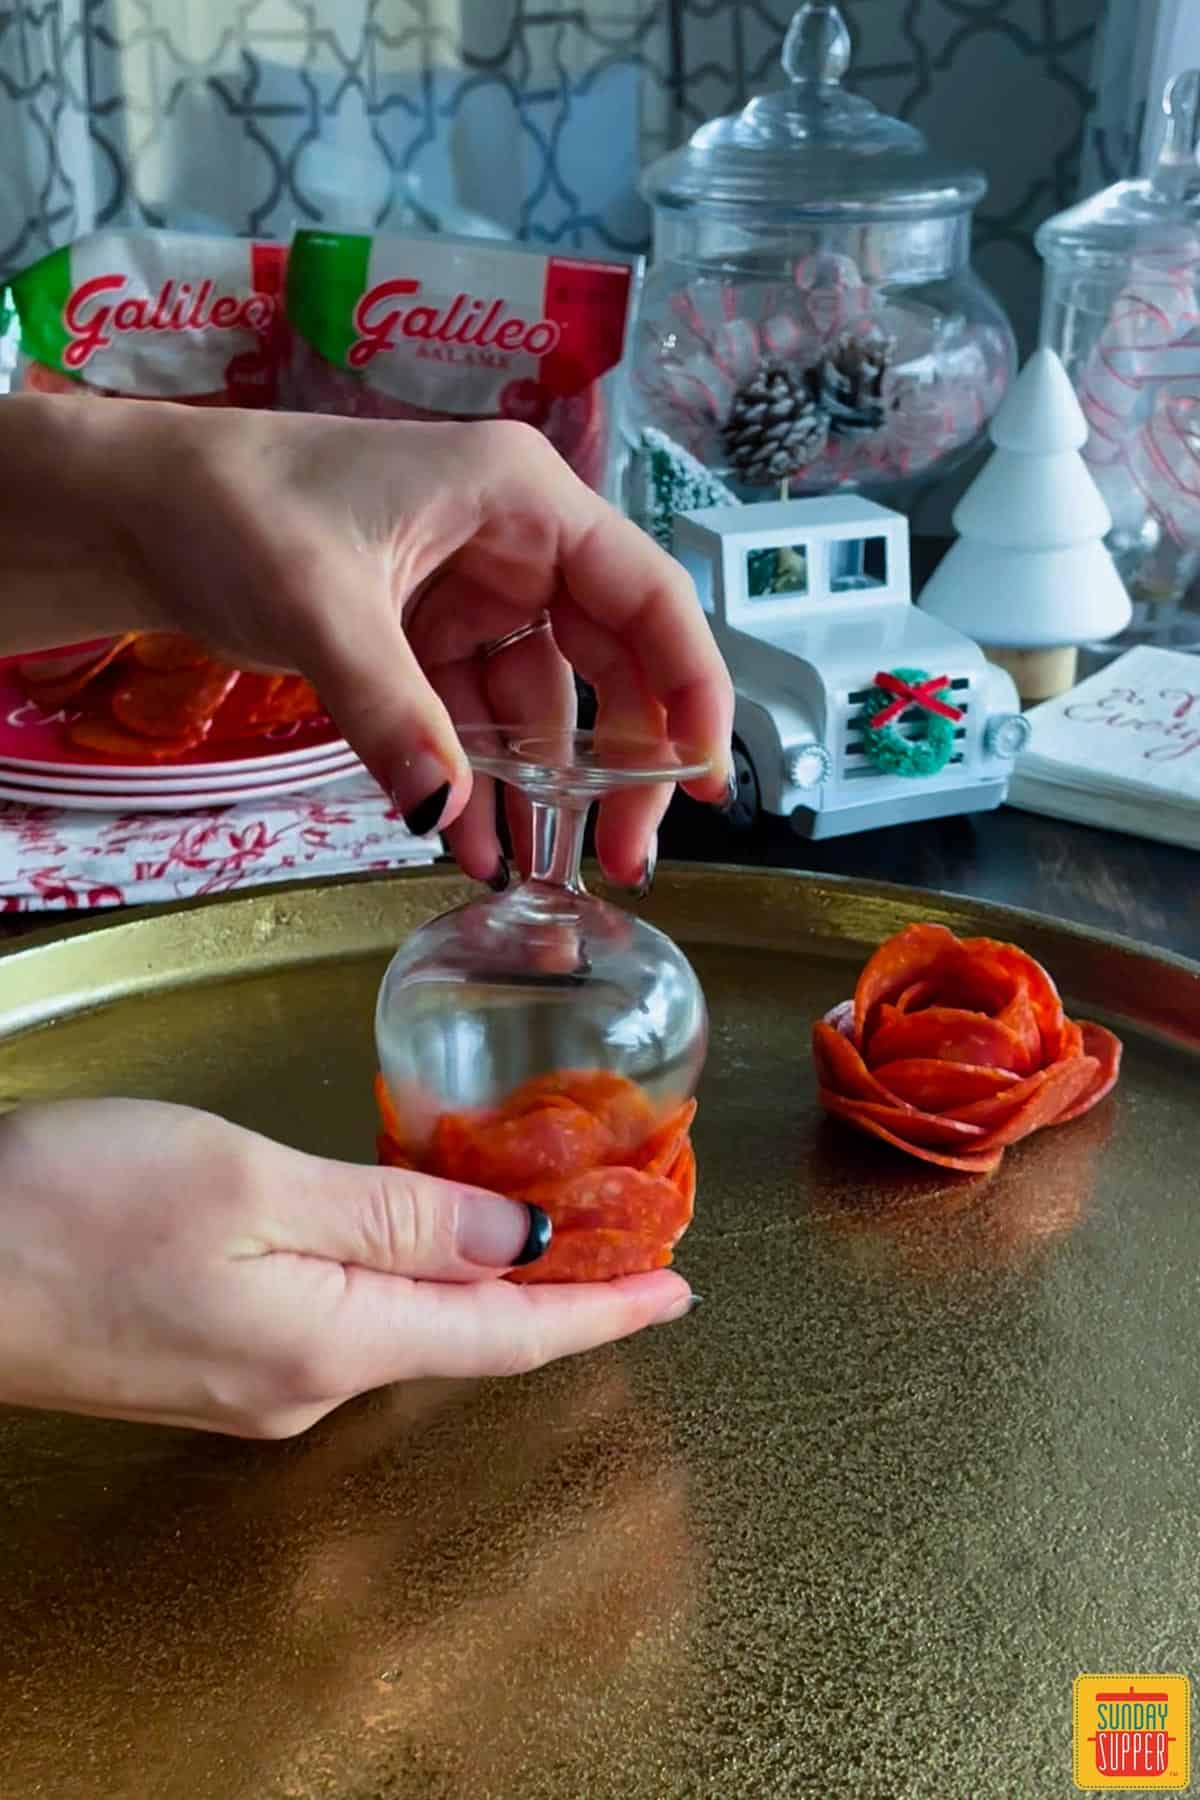 Taking pepperoni rose out of glass onto platter